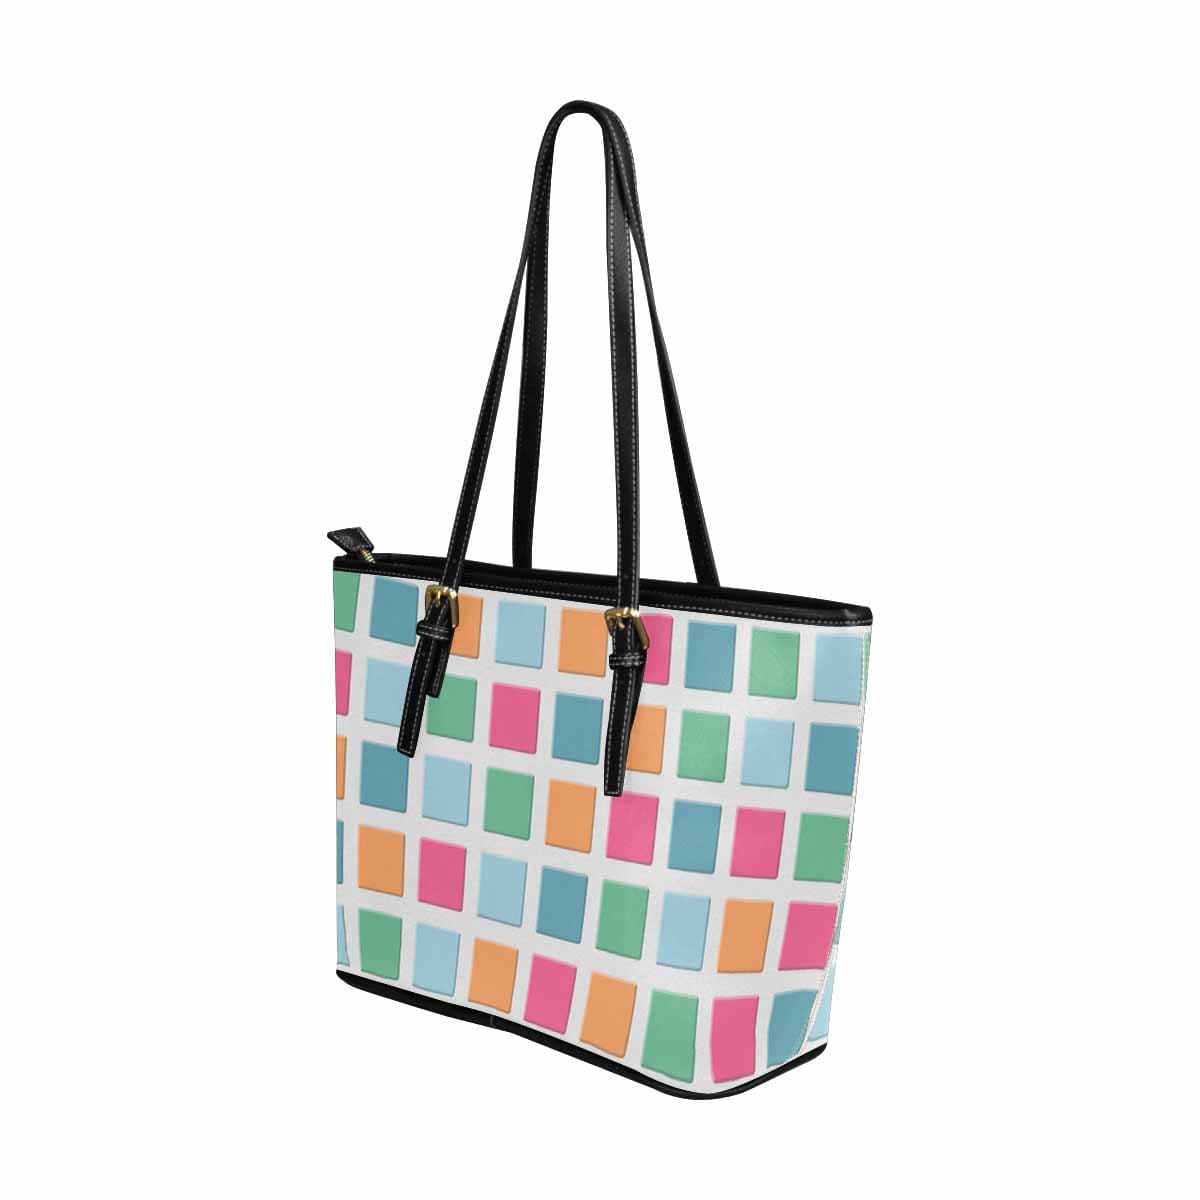 Large Leather Tote Shoulder Bag - Mosaic Tiles Multicolor - Bags | Leather Tote